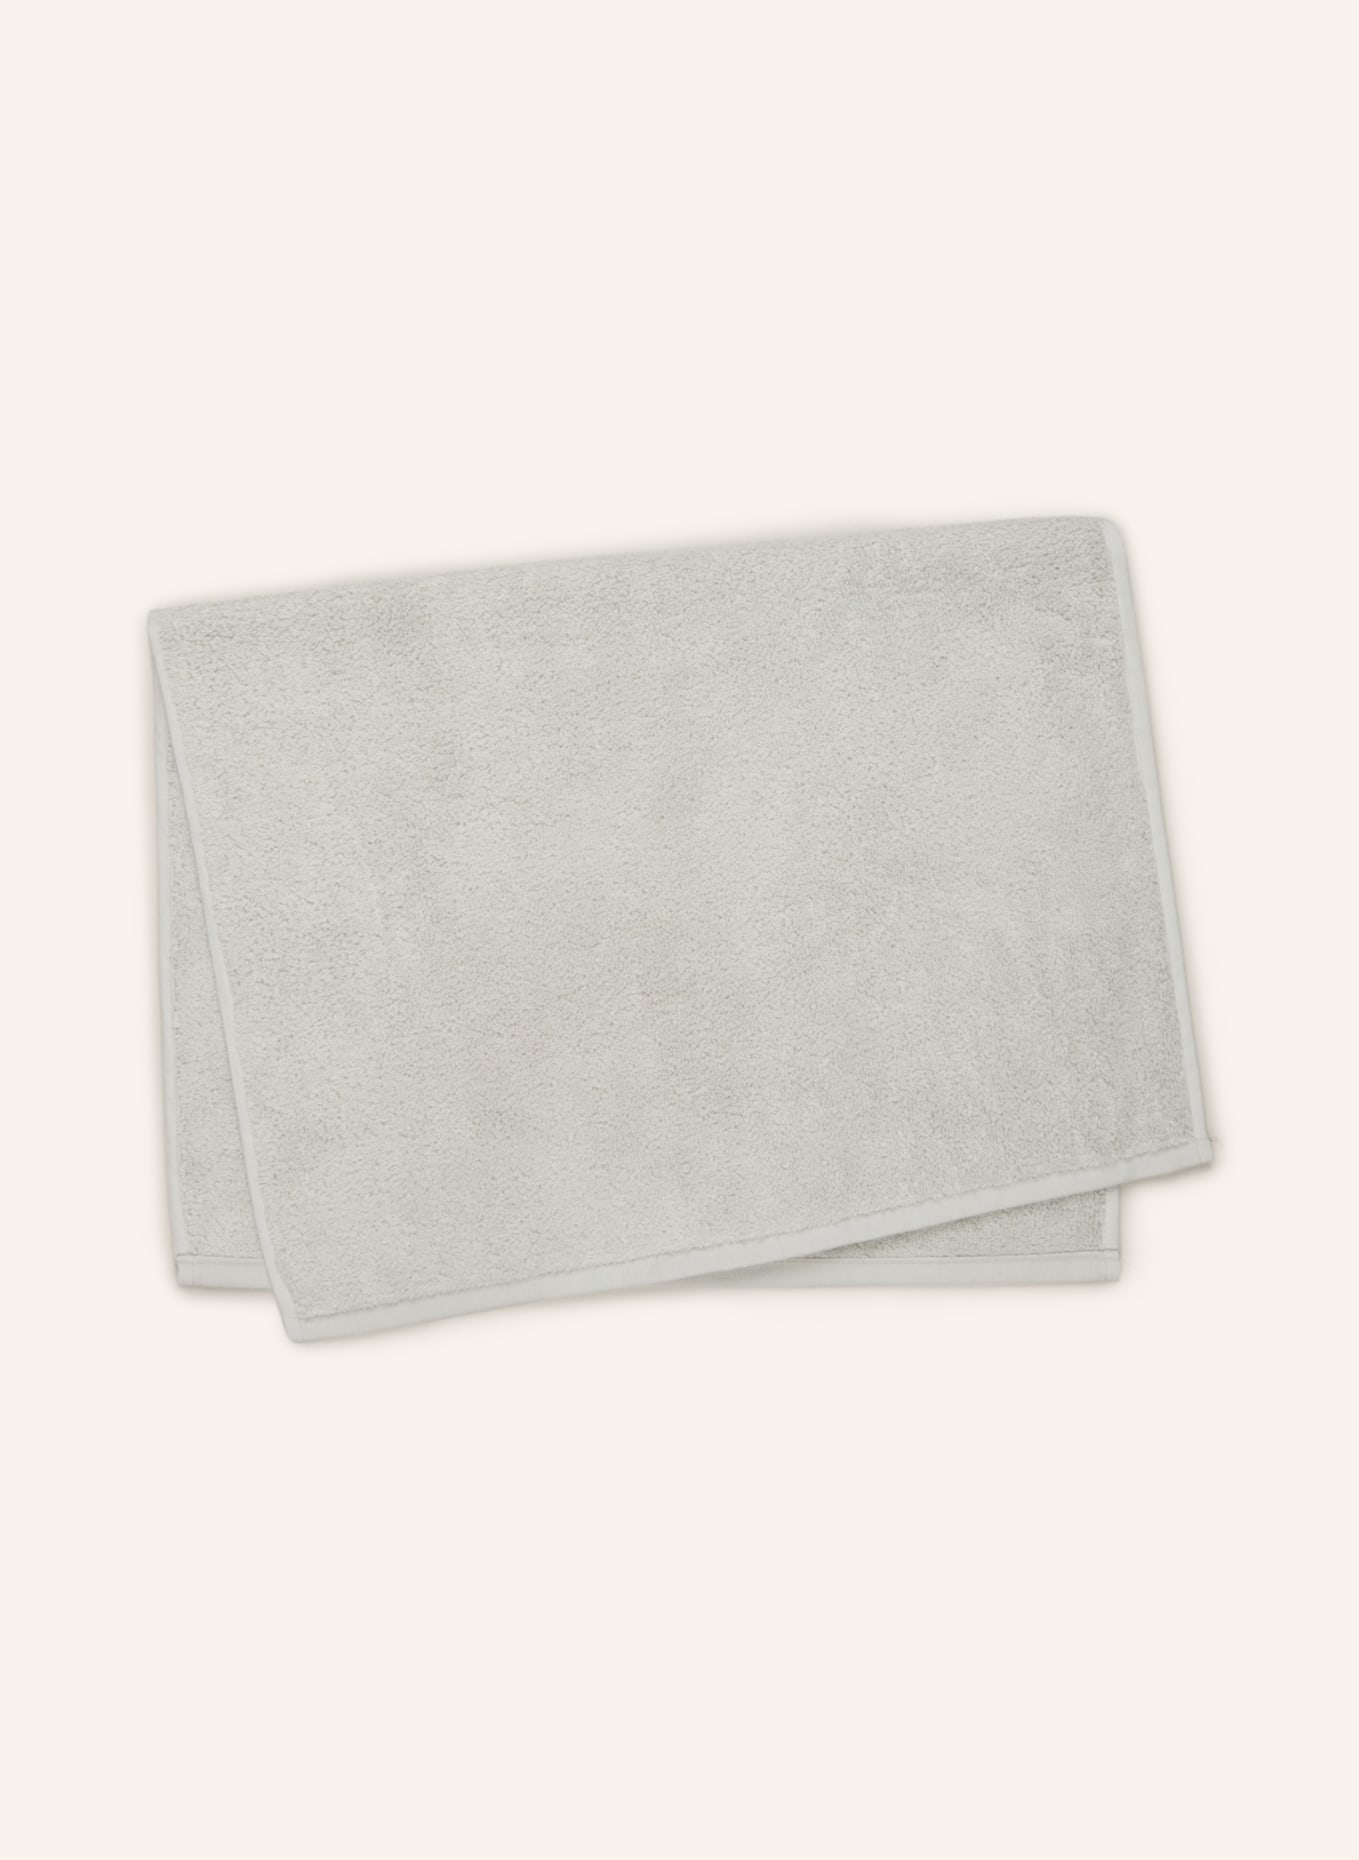 weseta switzerland Guest towel DREAMPURE, Color: 14 SILBER (Image 2)